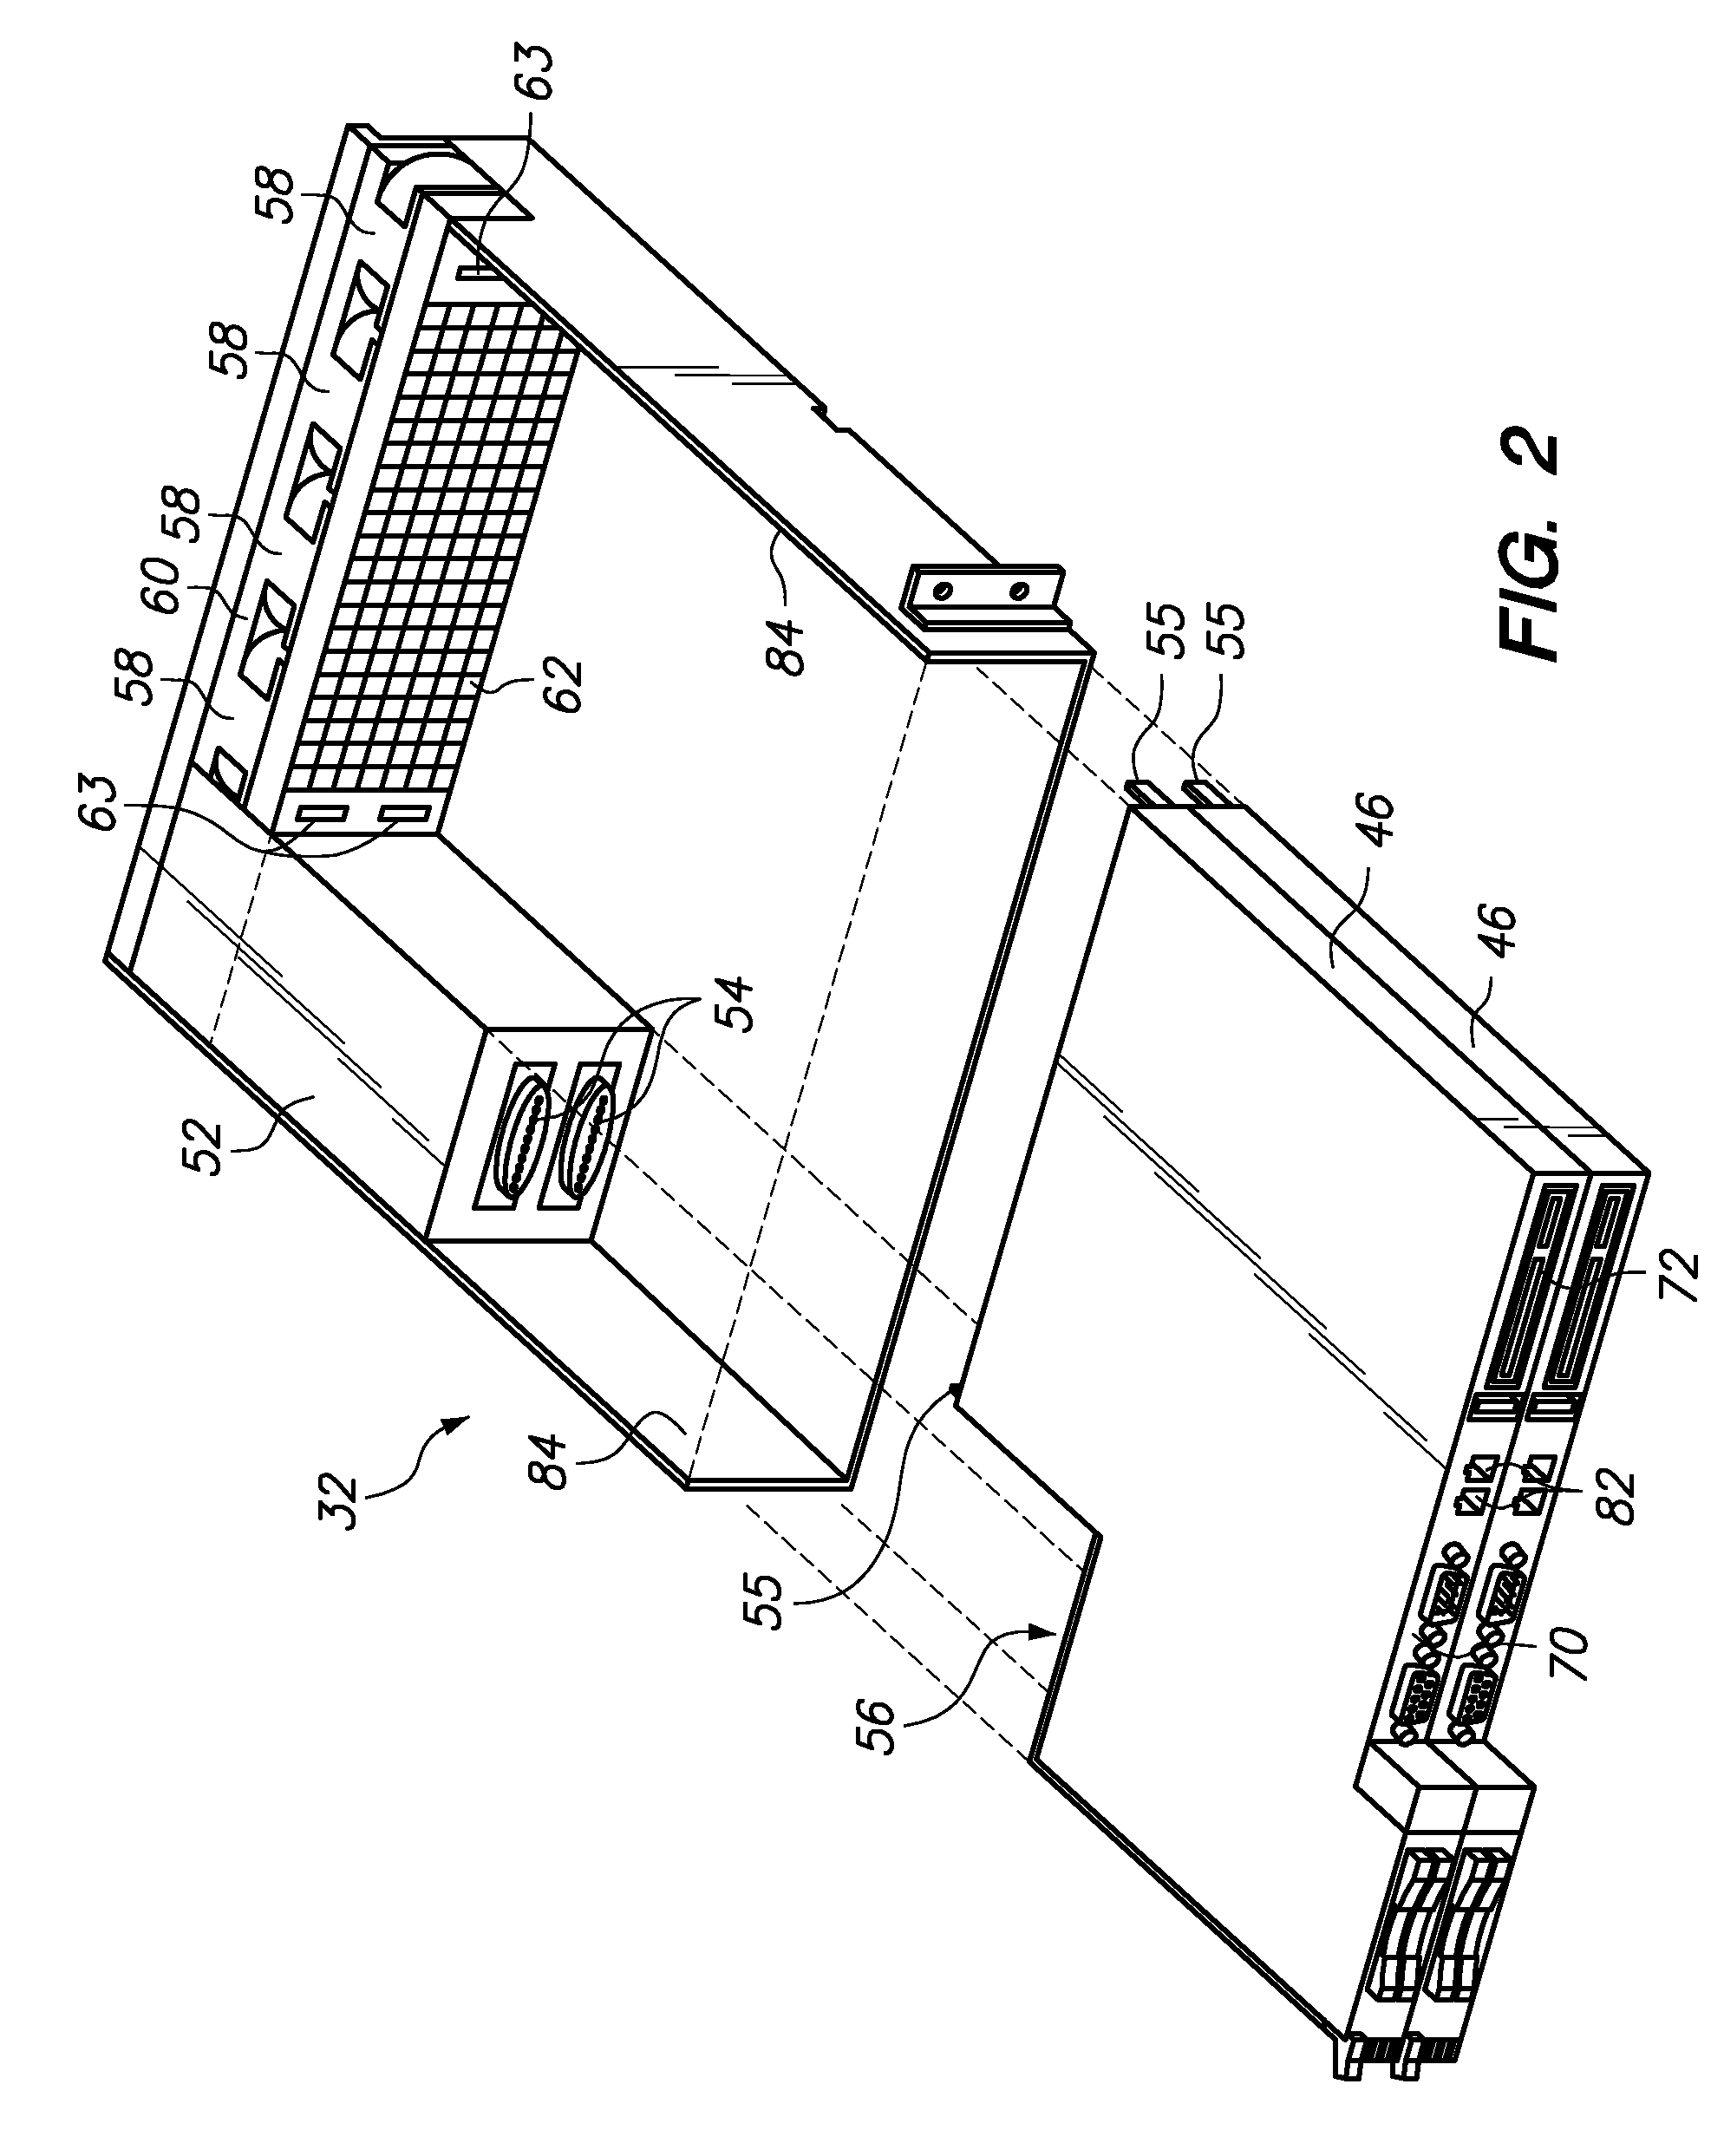 Variable position dampers for controlling air flow to multiple modules in a common chassis